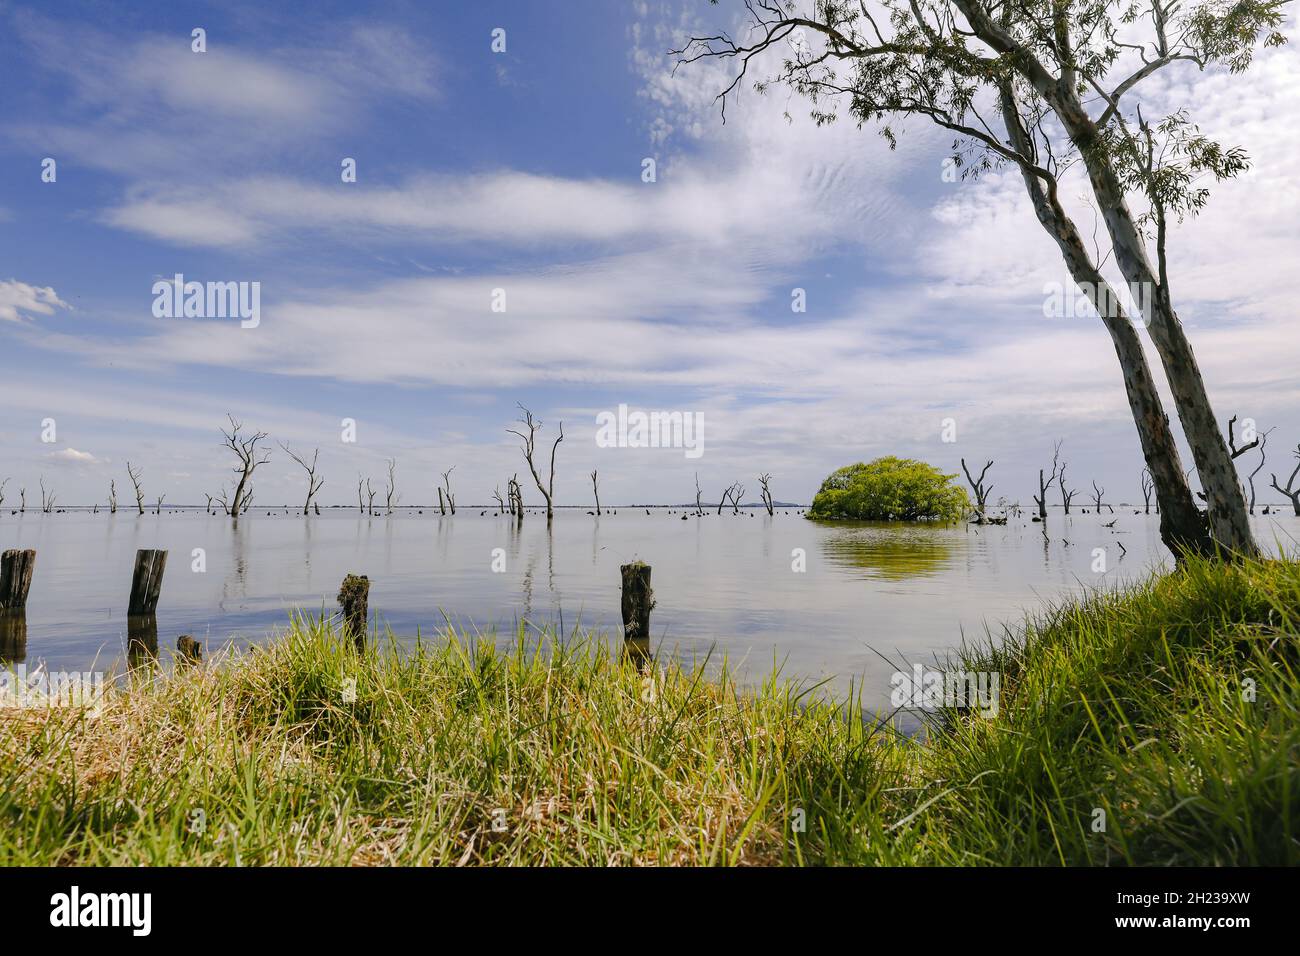 Kow Swamp, Victoria Australia. Water scene with dead trees on cloudy day, landscape image Stock Photo